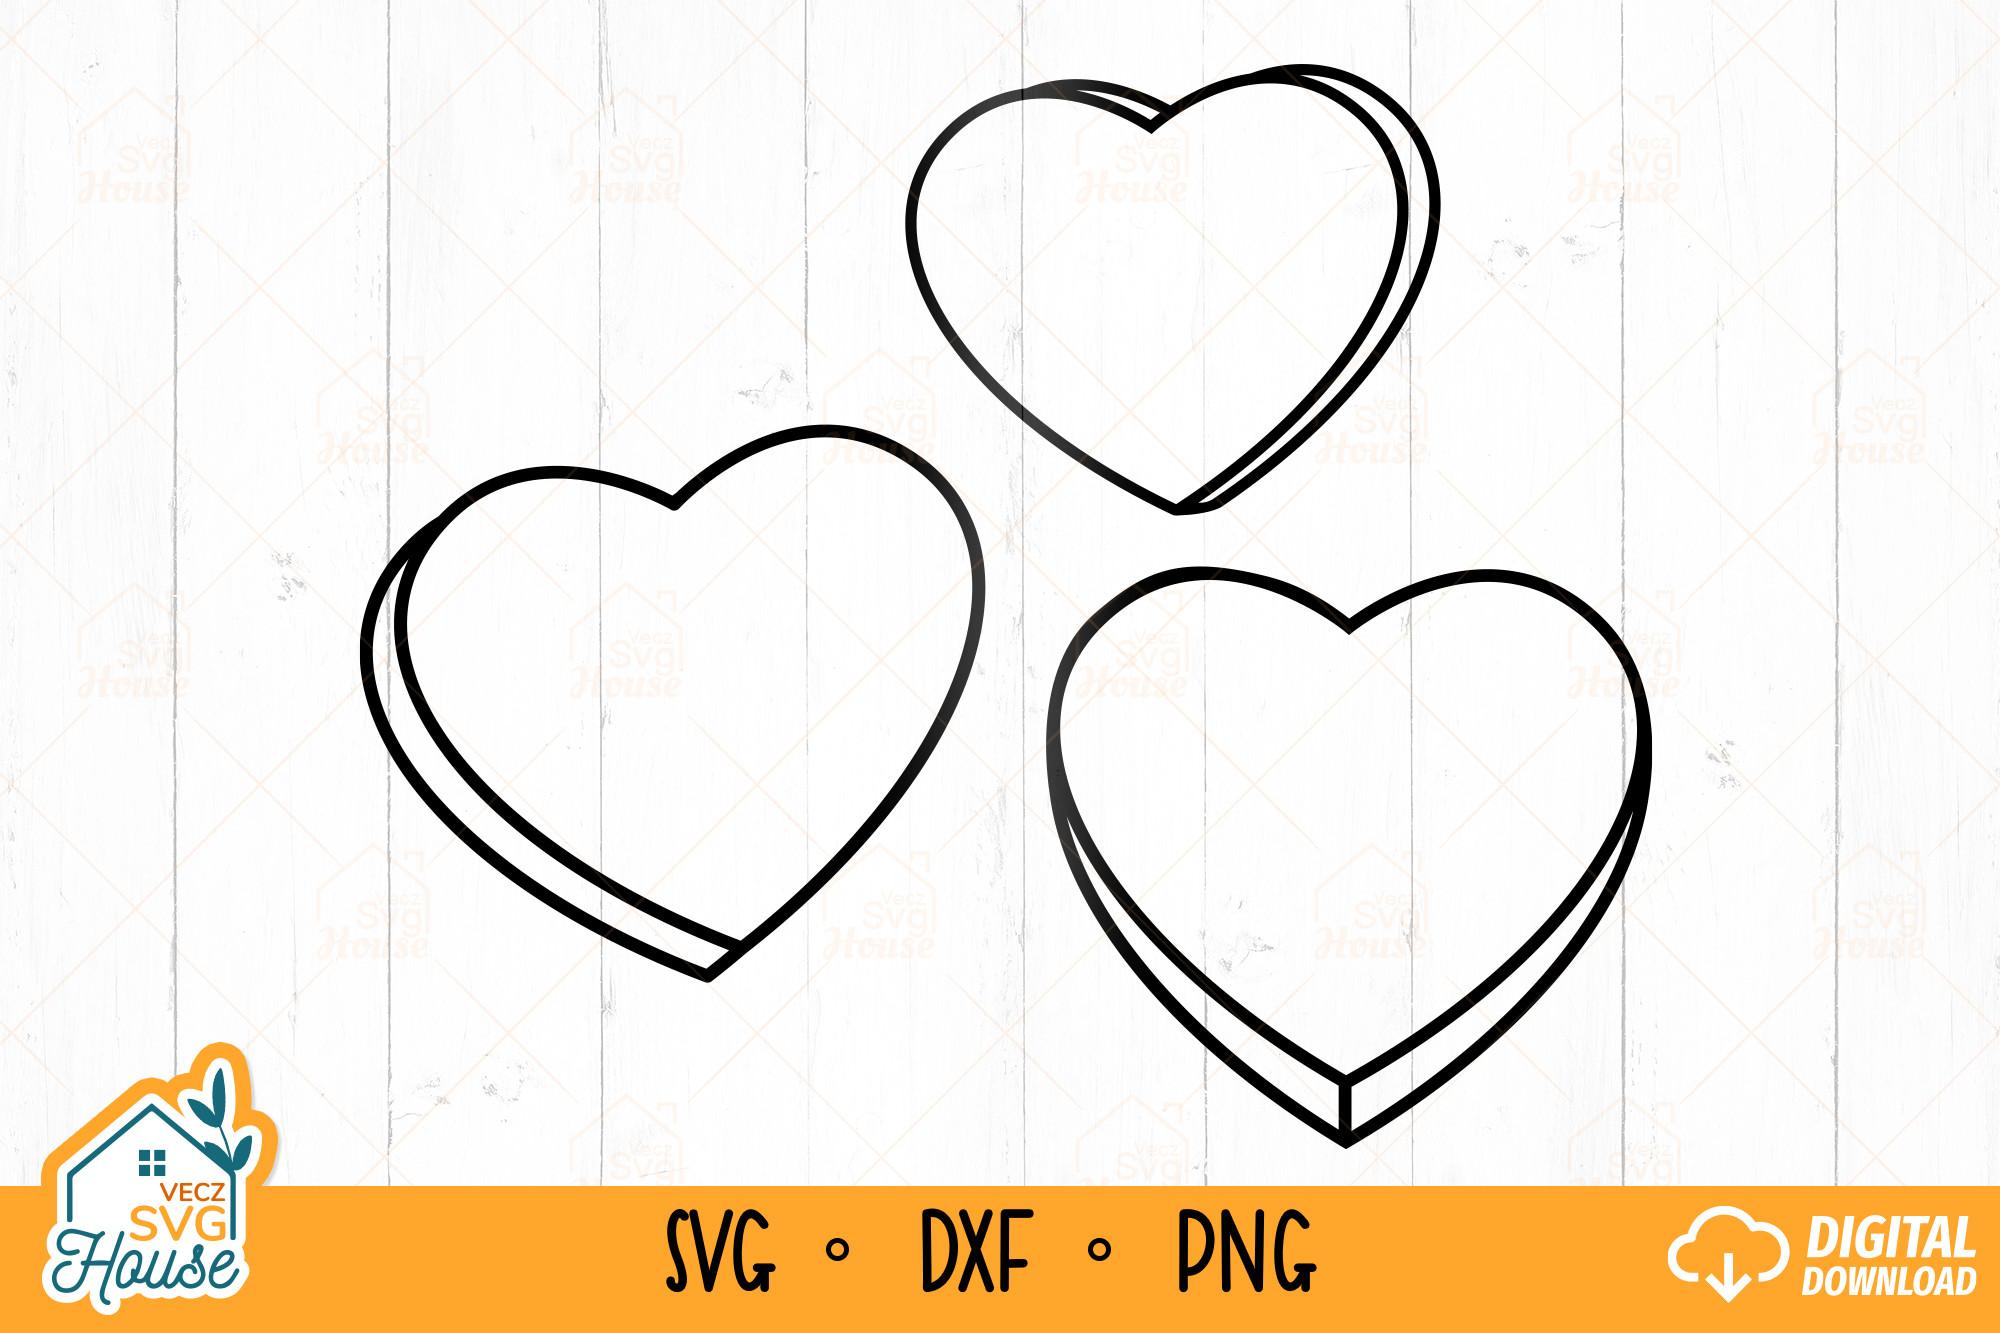 Conversation Hearts SVG Candy Hand Draw